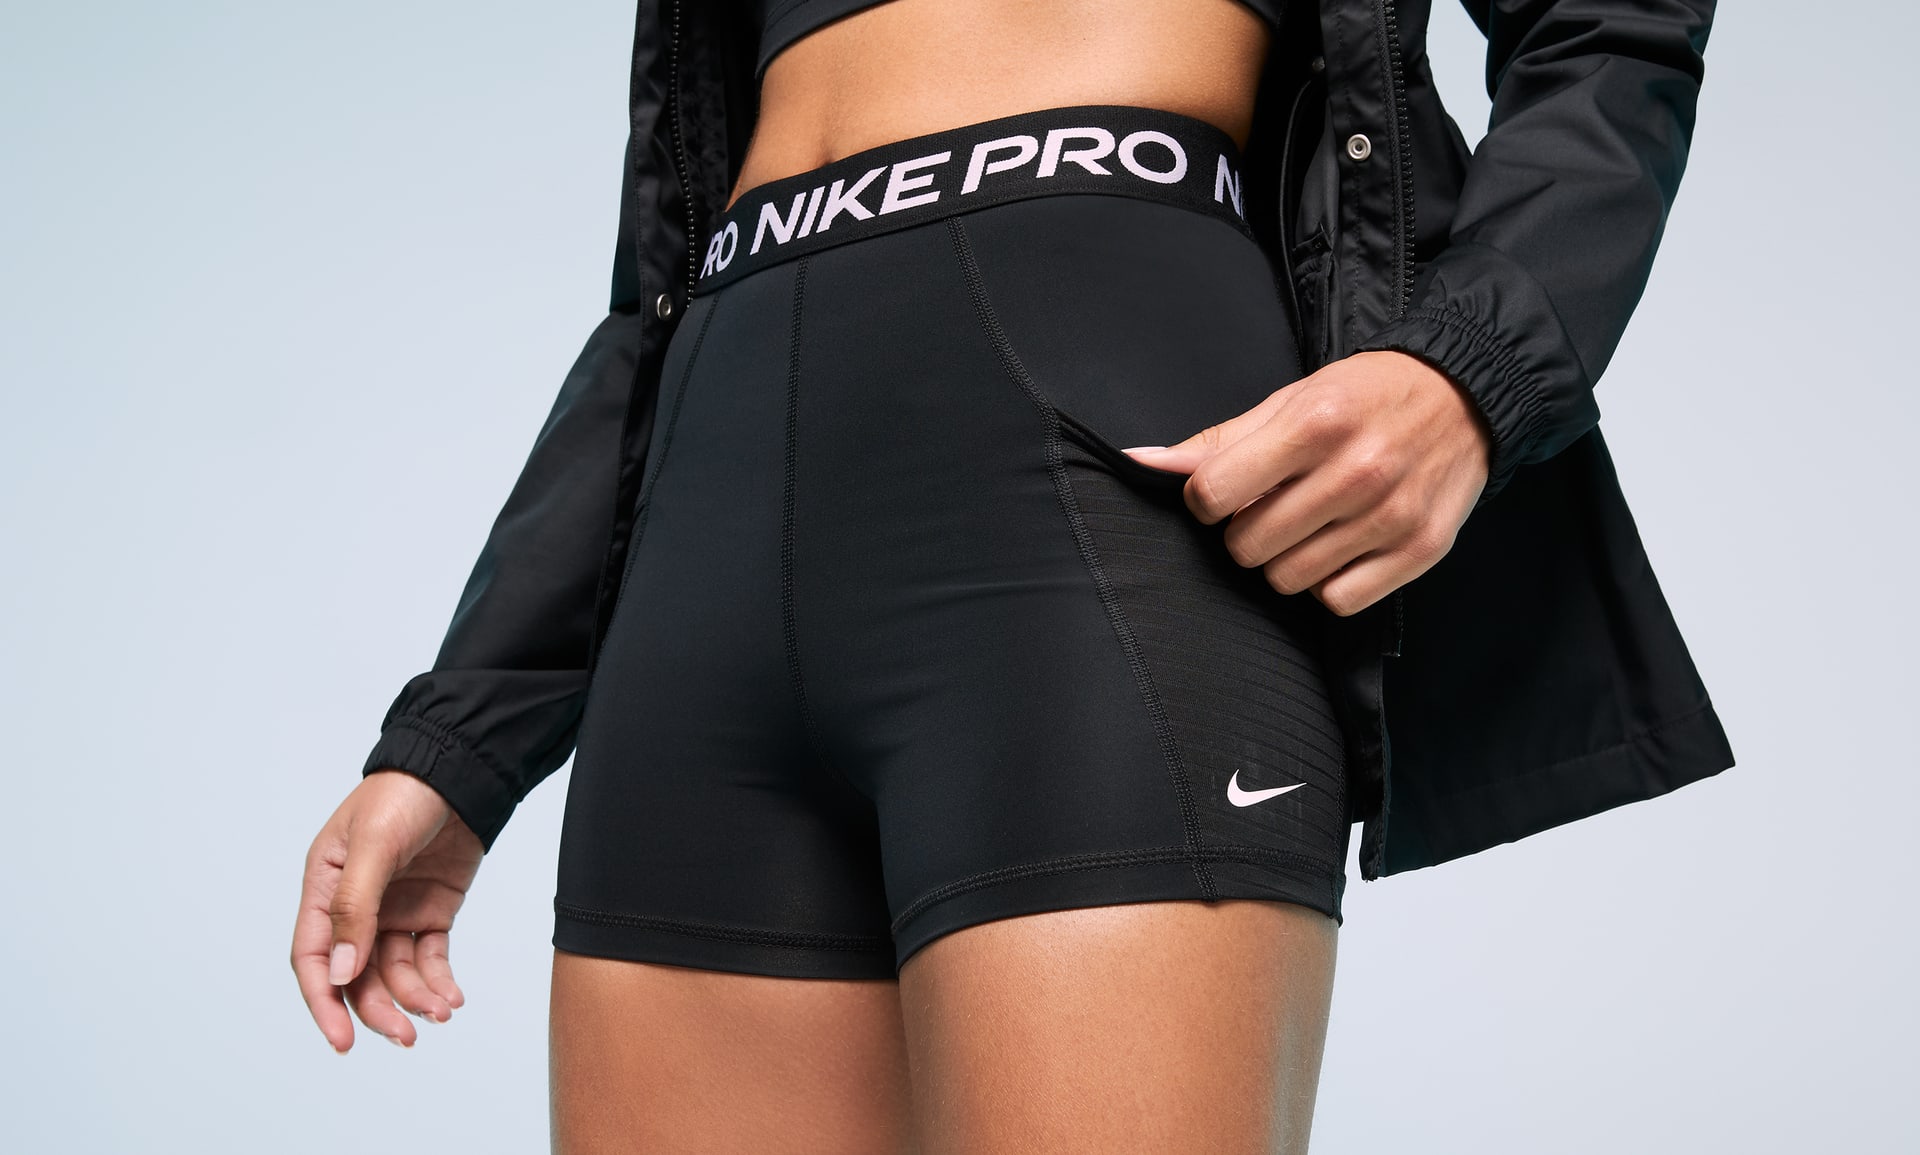 Pro Women's High-Waisted Training Shorts with Pockets.